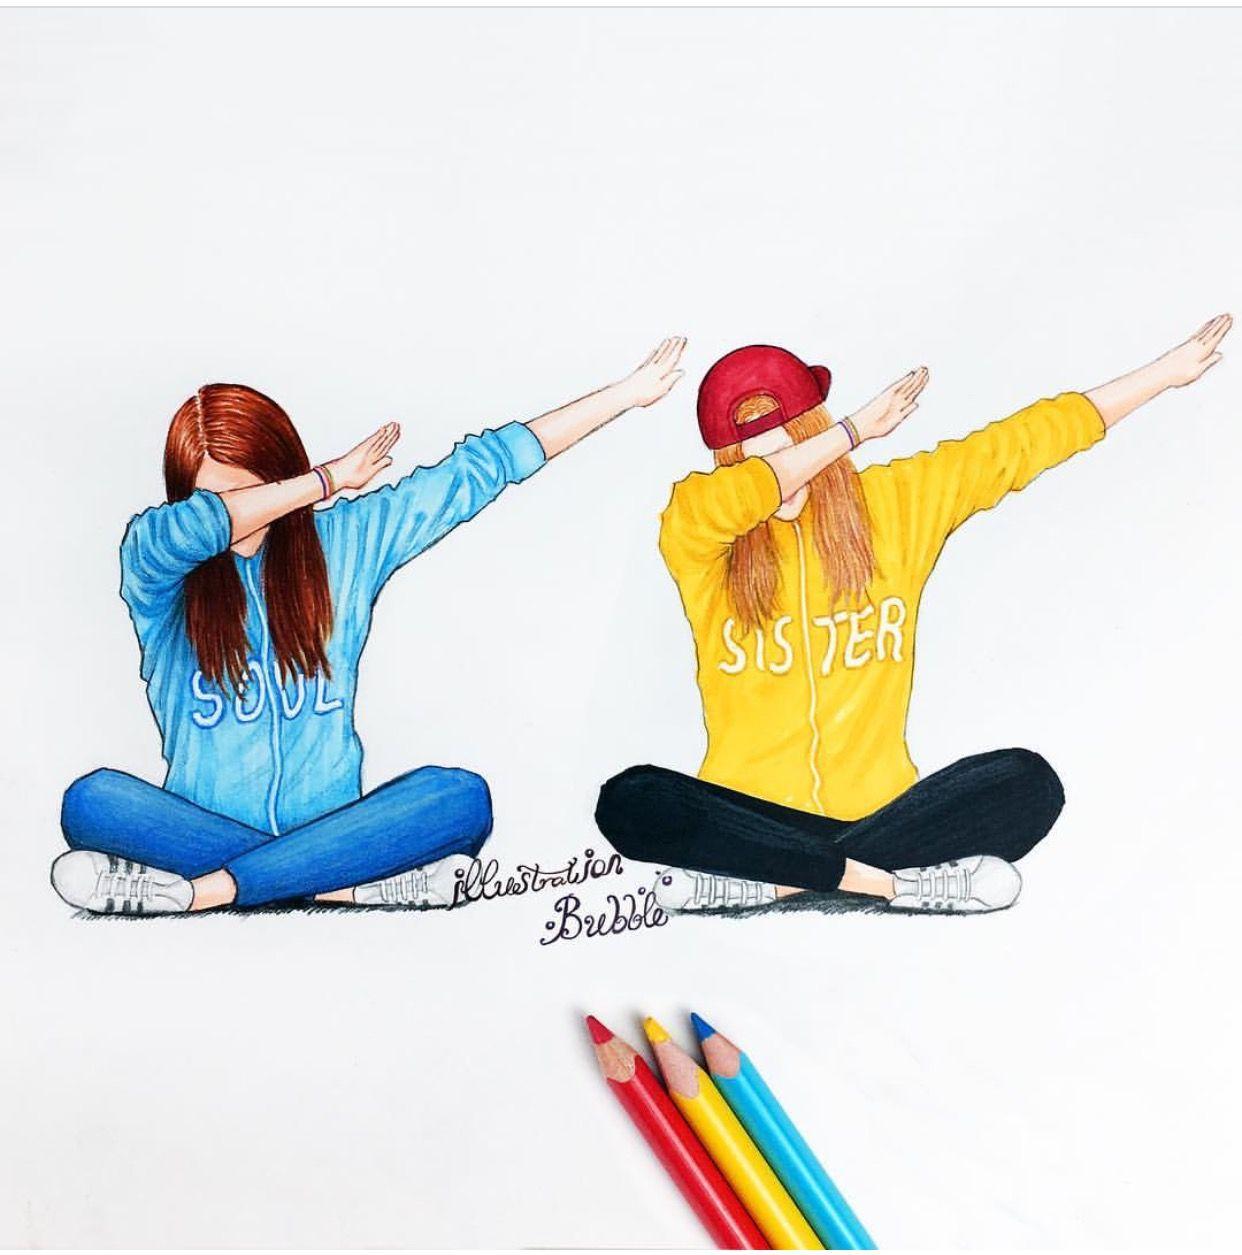 Dab with your friends. Mejores amigas dibujo, Imagenes de mejores amigas, Dibujos para amigas